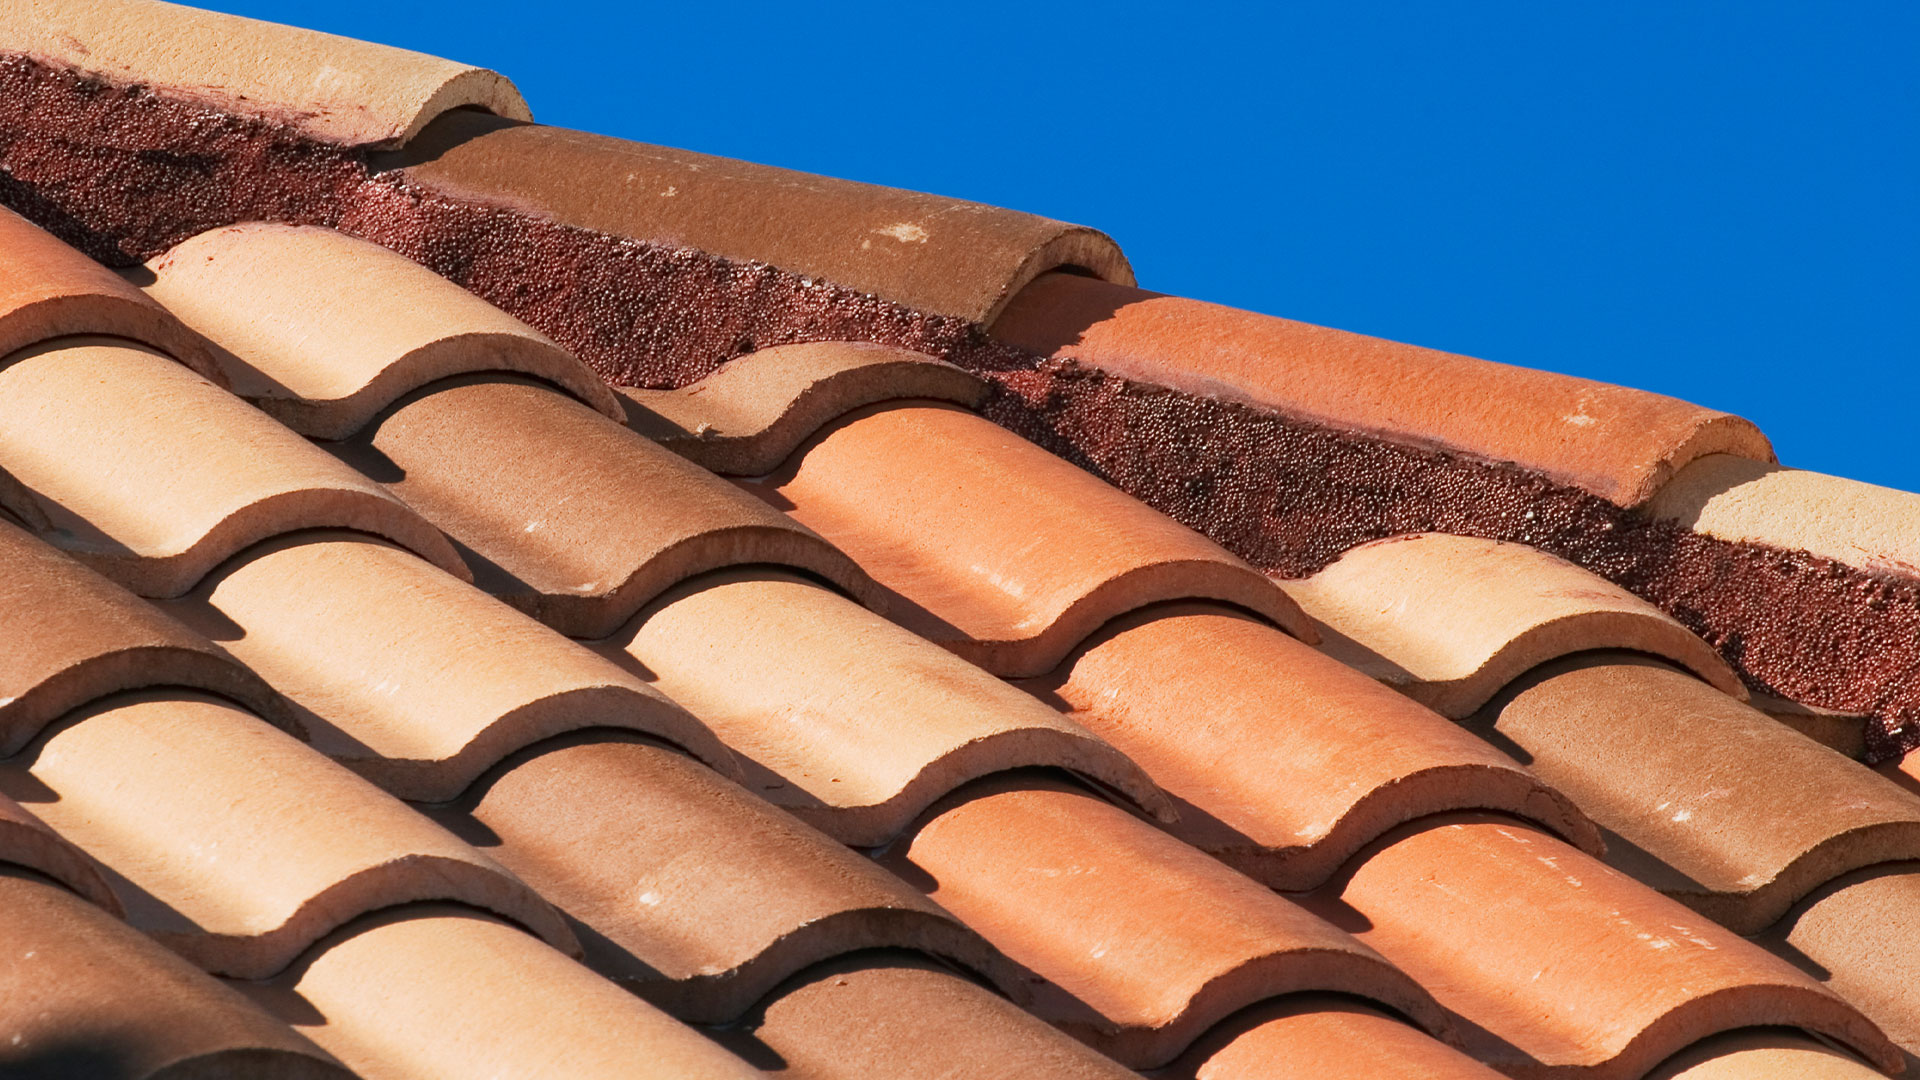 Restore The Years Of Life To Your Roof With Our Roof Cleaning Services